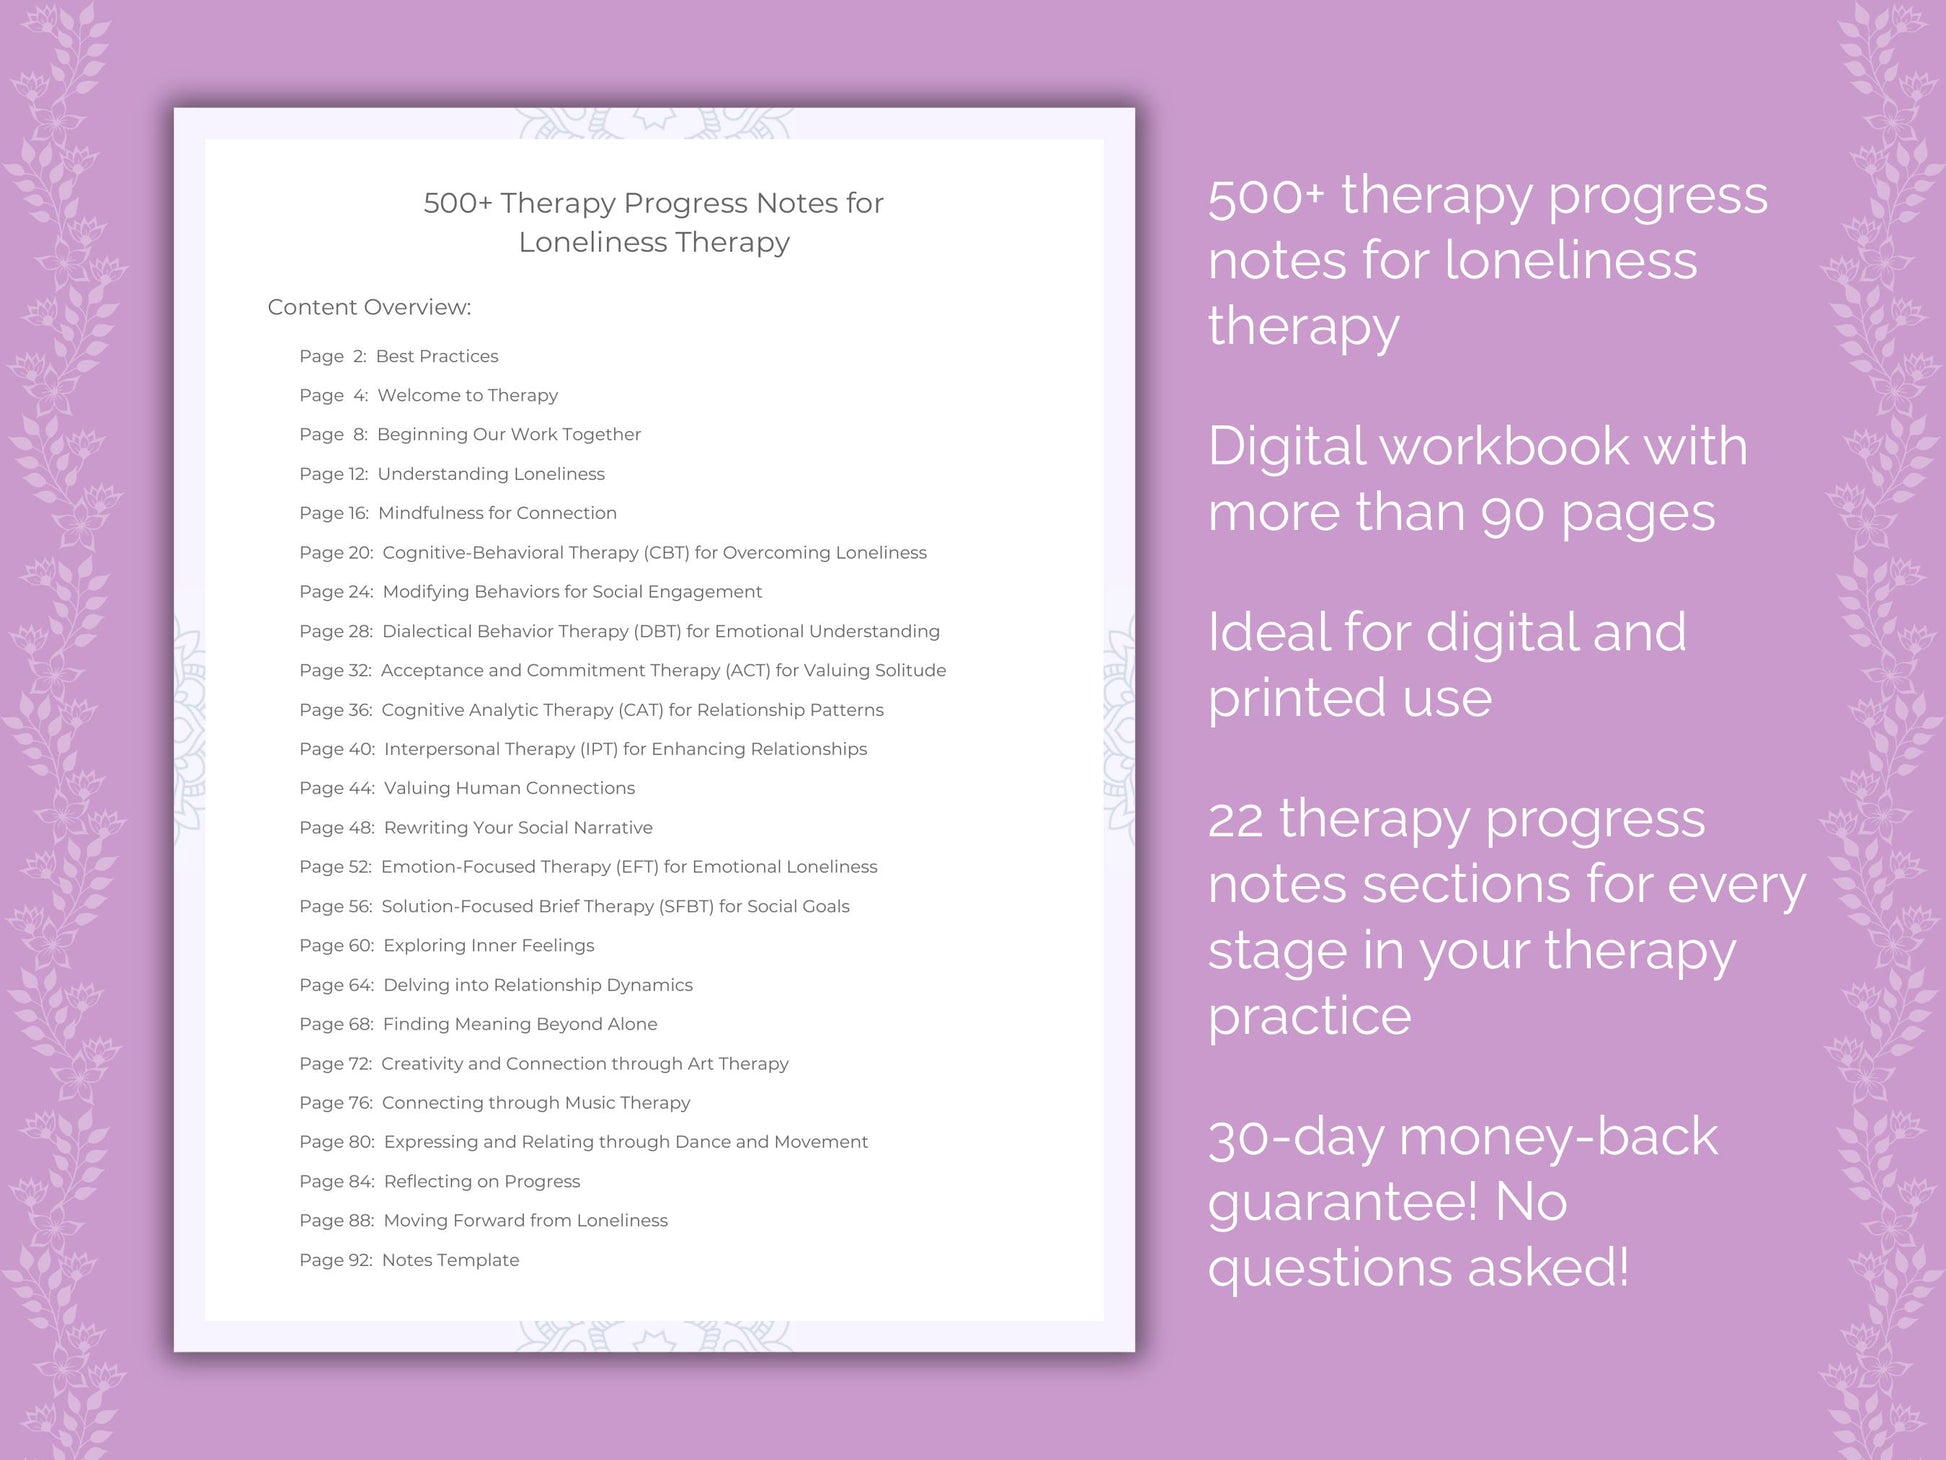 Loneliness Therapy Progress Notes Resource